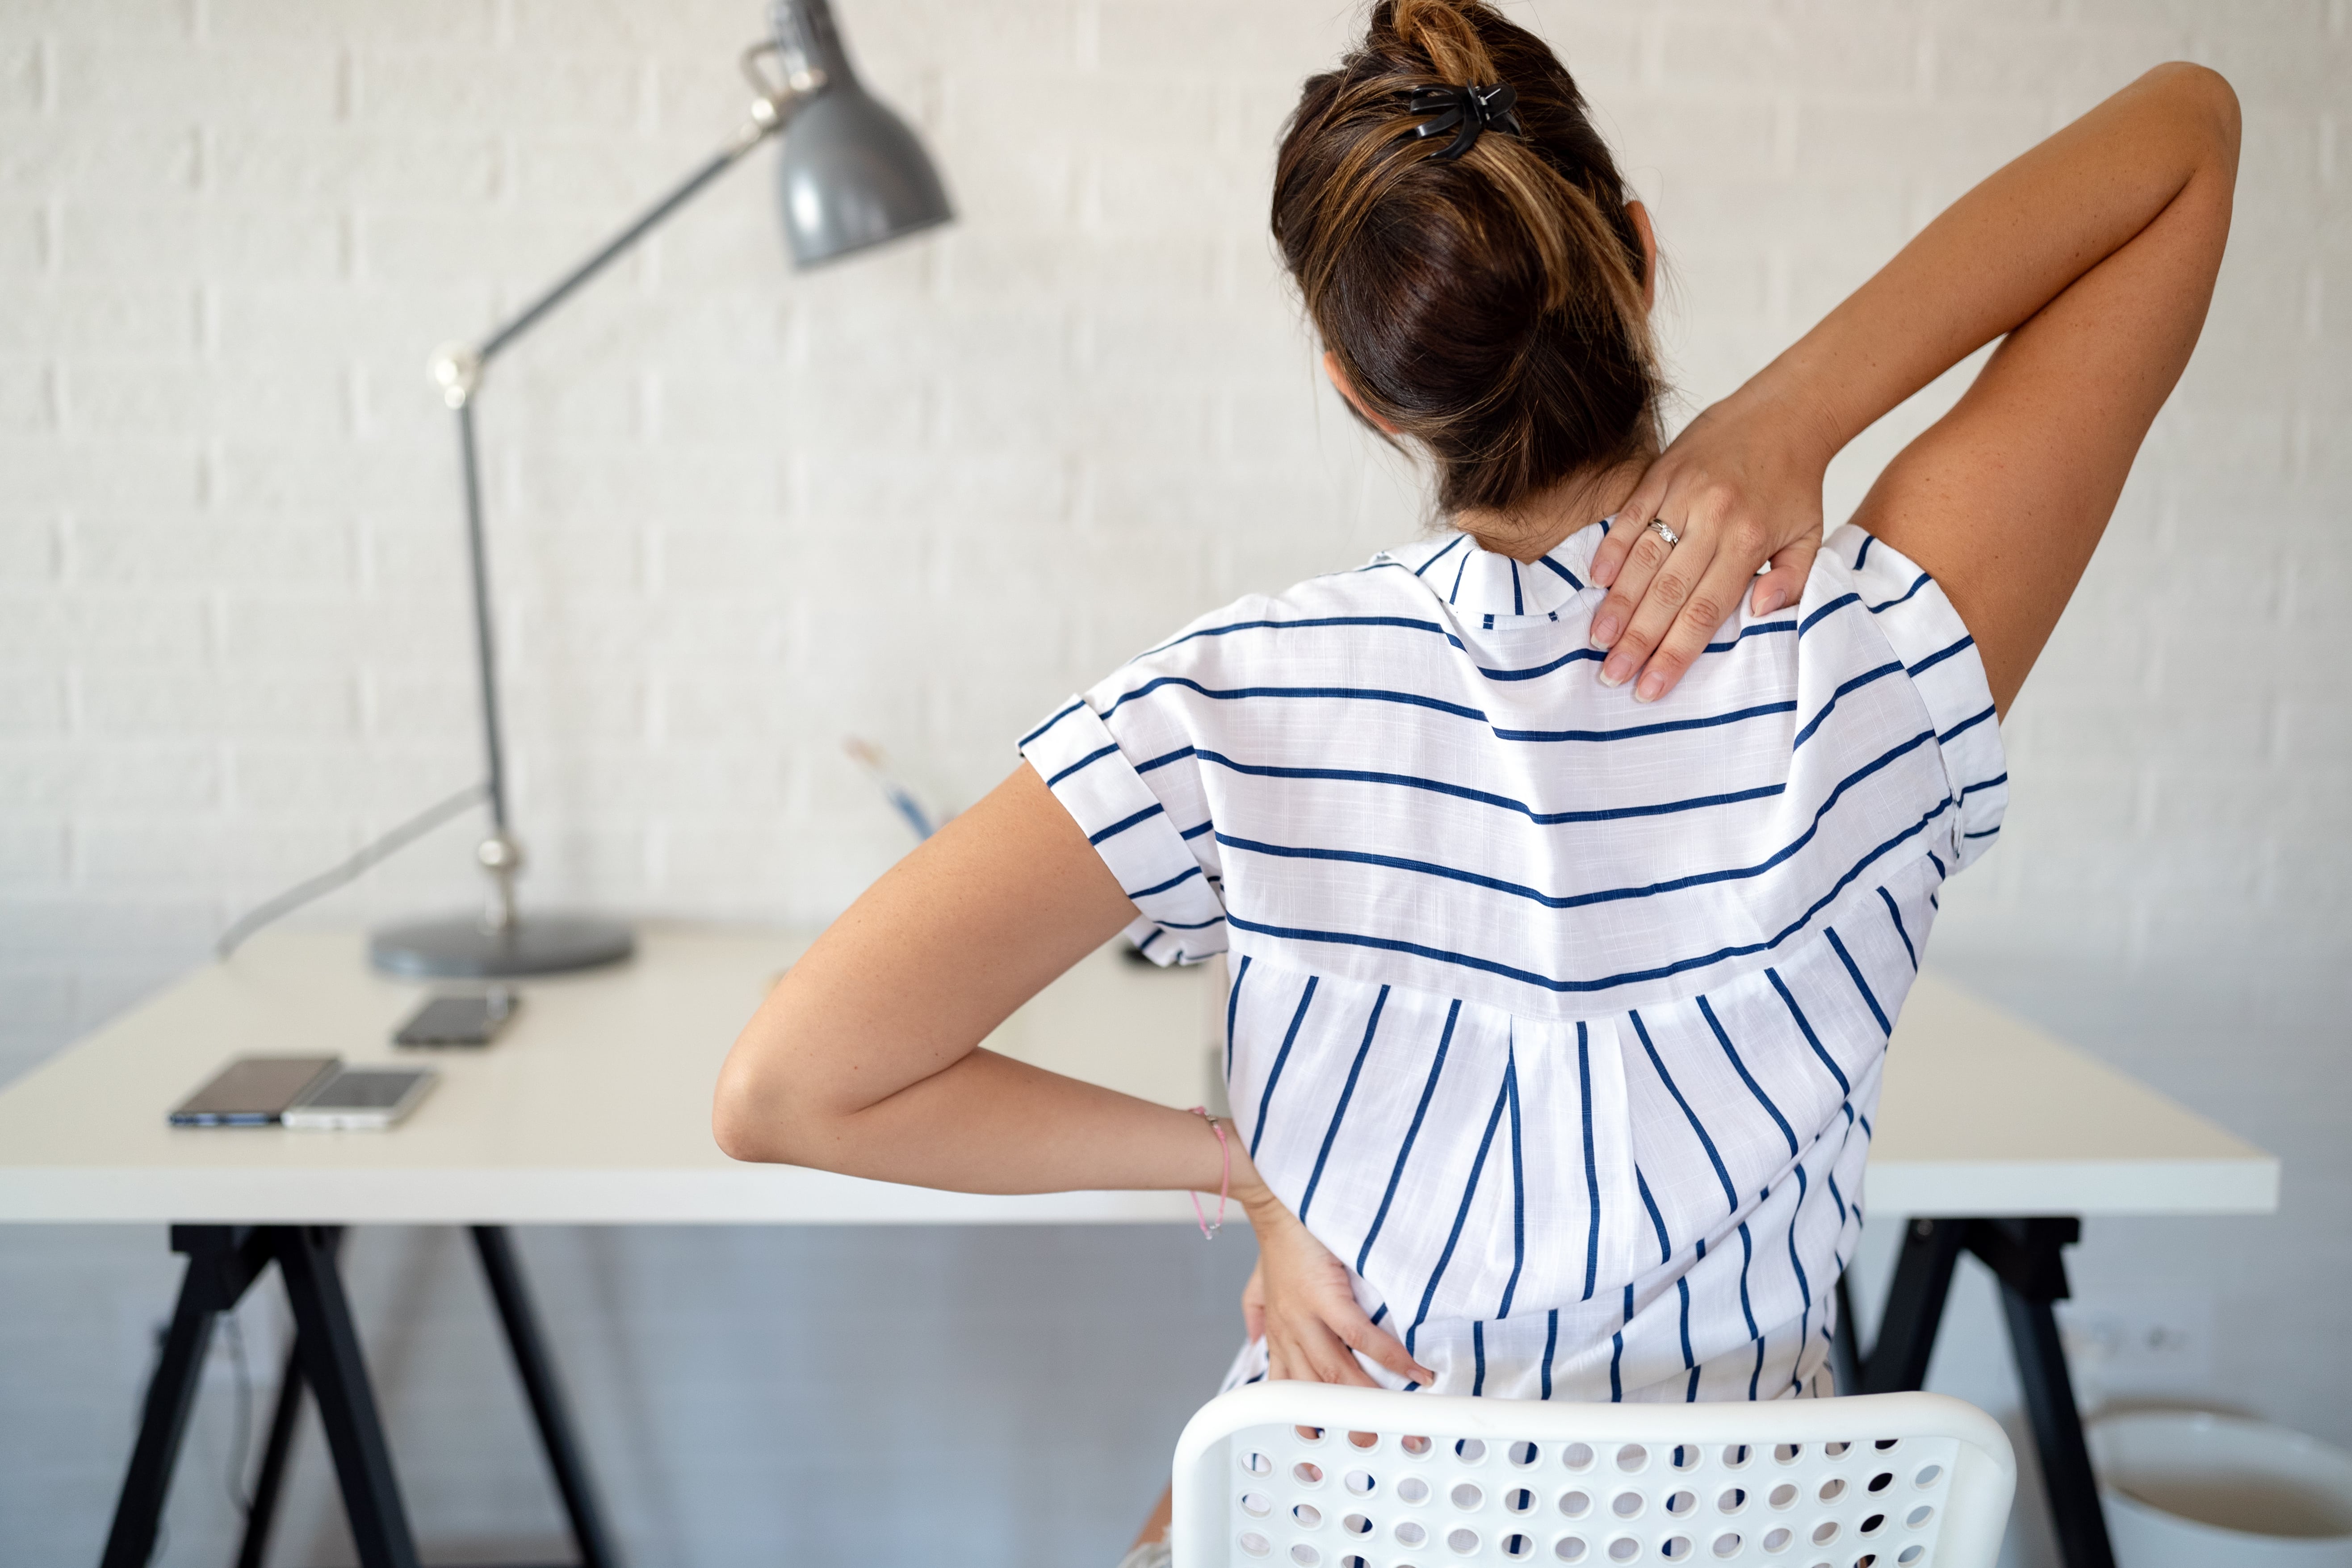 Woman at desk with her hands on her back seemingly experincing back pain